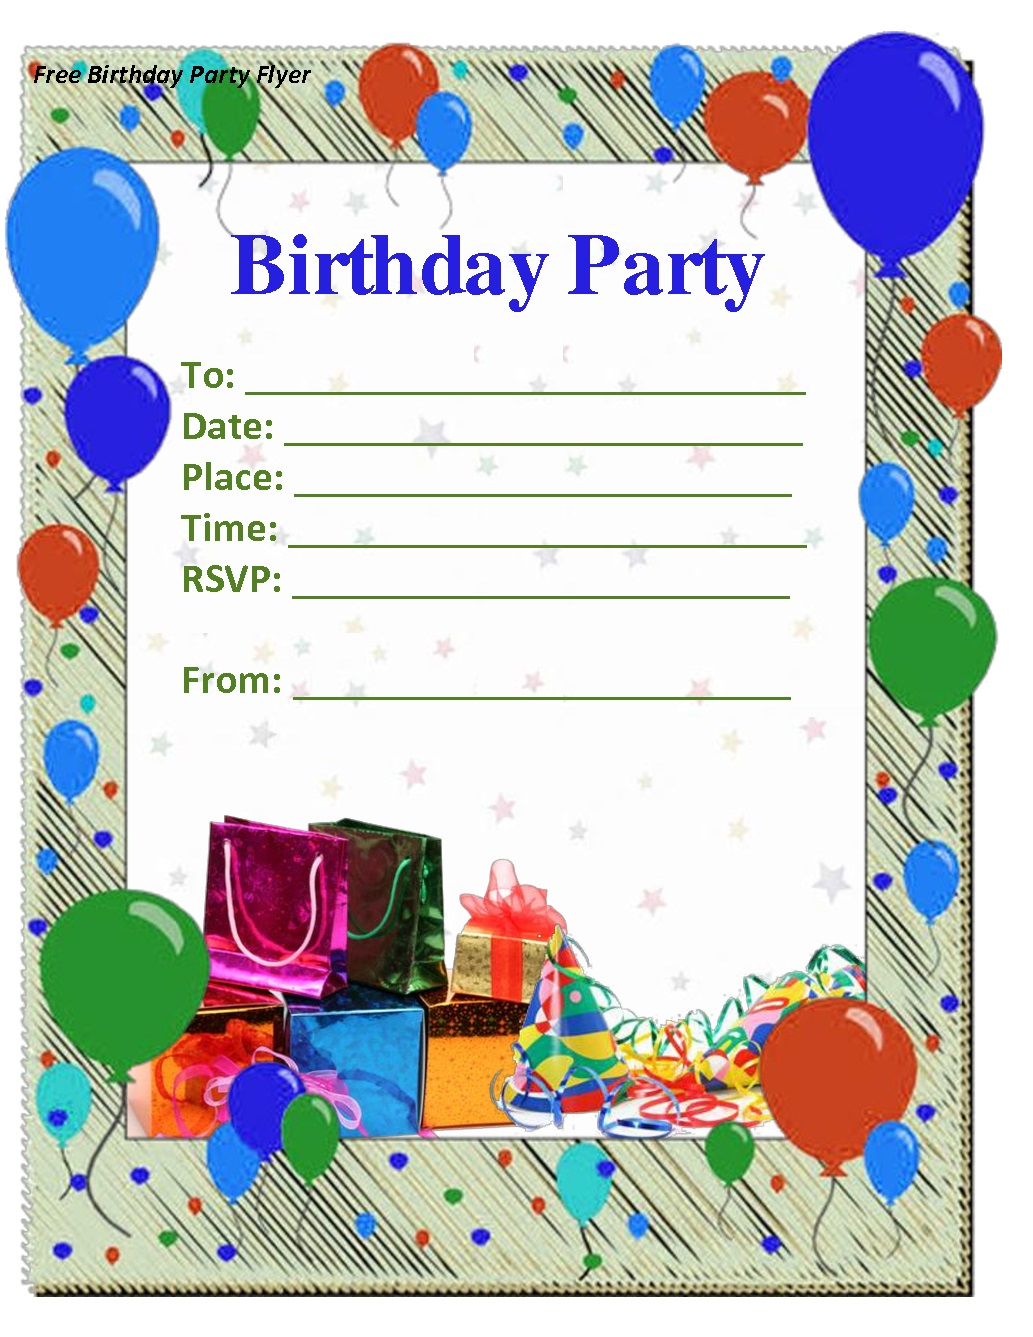 018 Birthday Party Invitations Template Ideas Th Invitation intended for dimensions 1033 X 1337